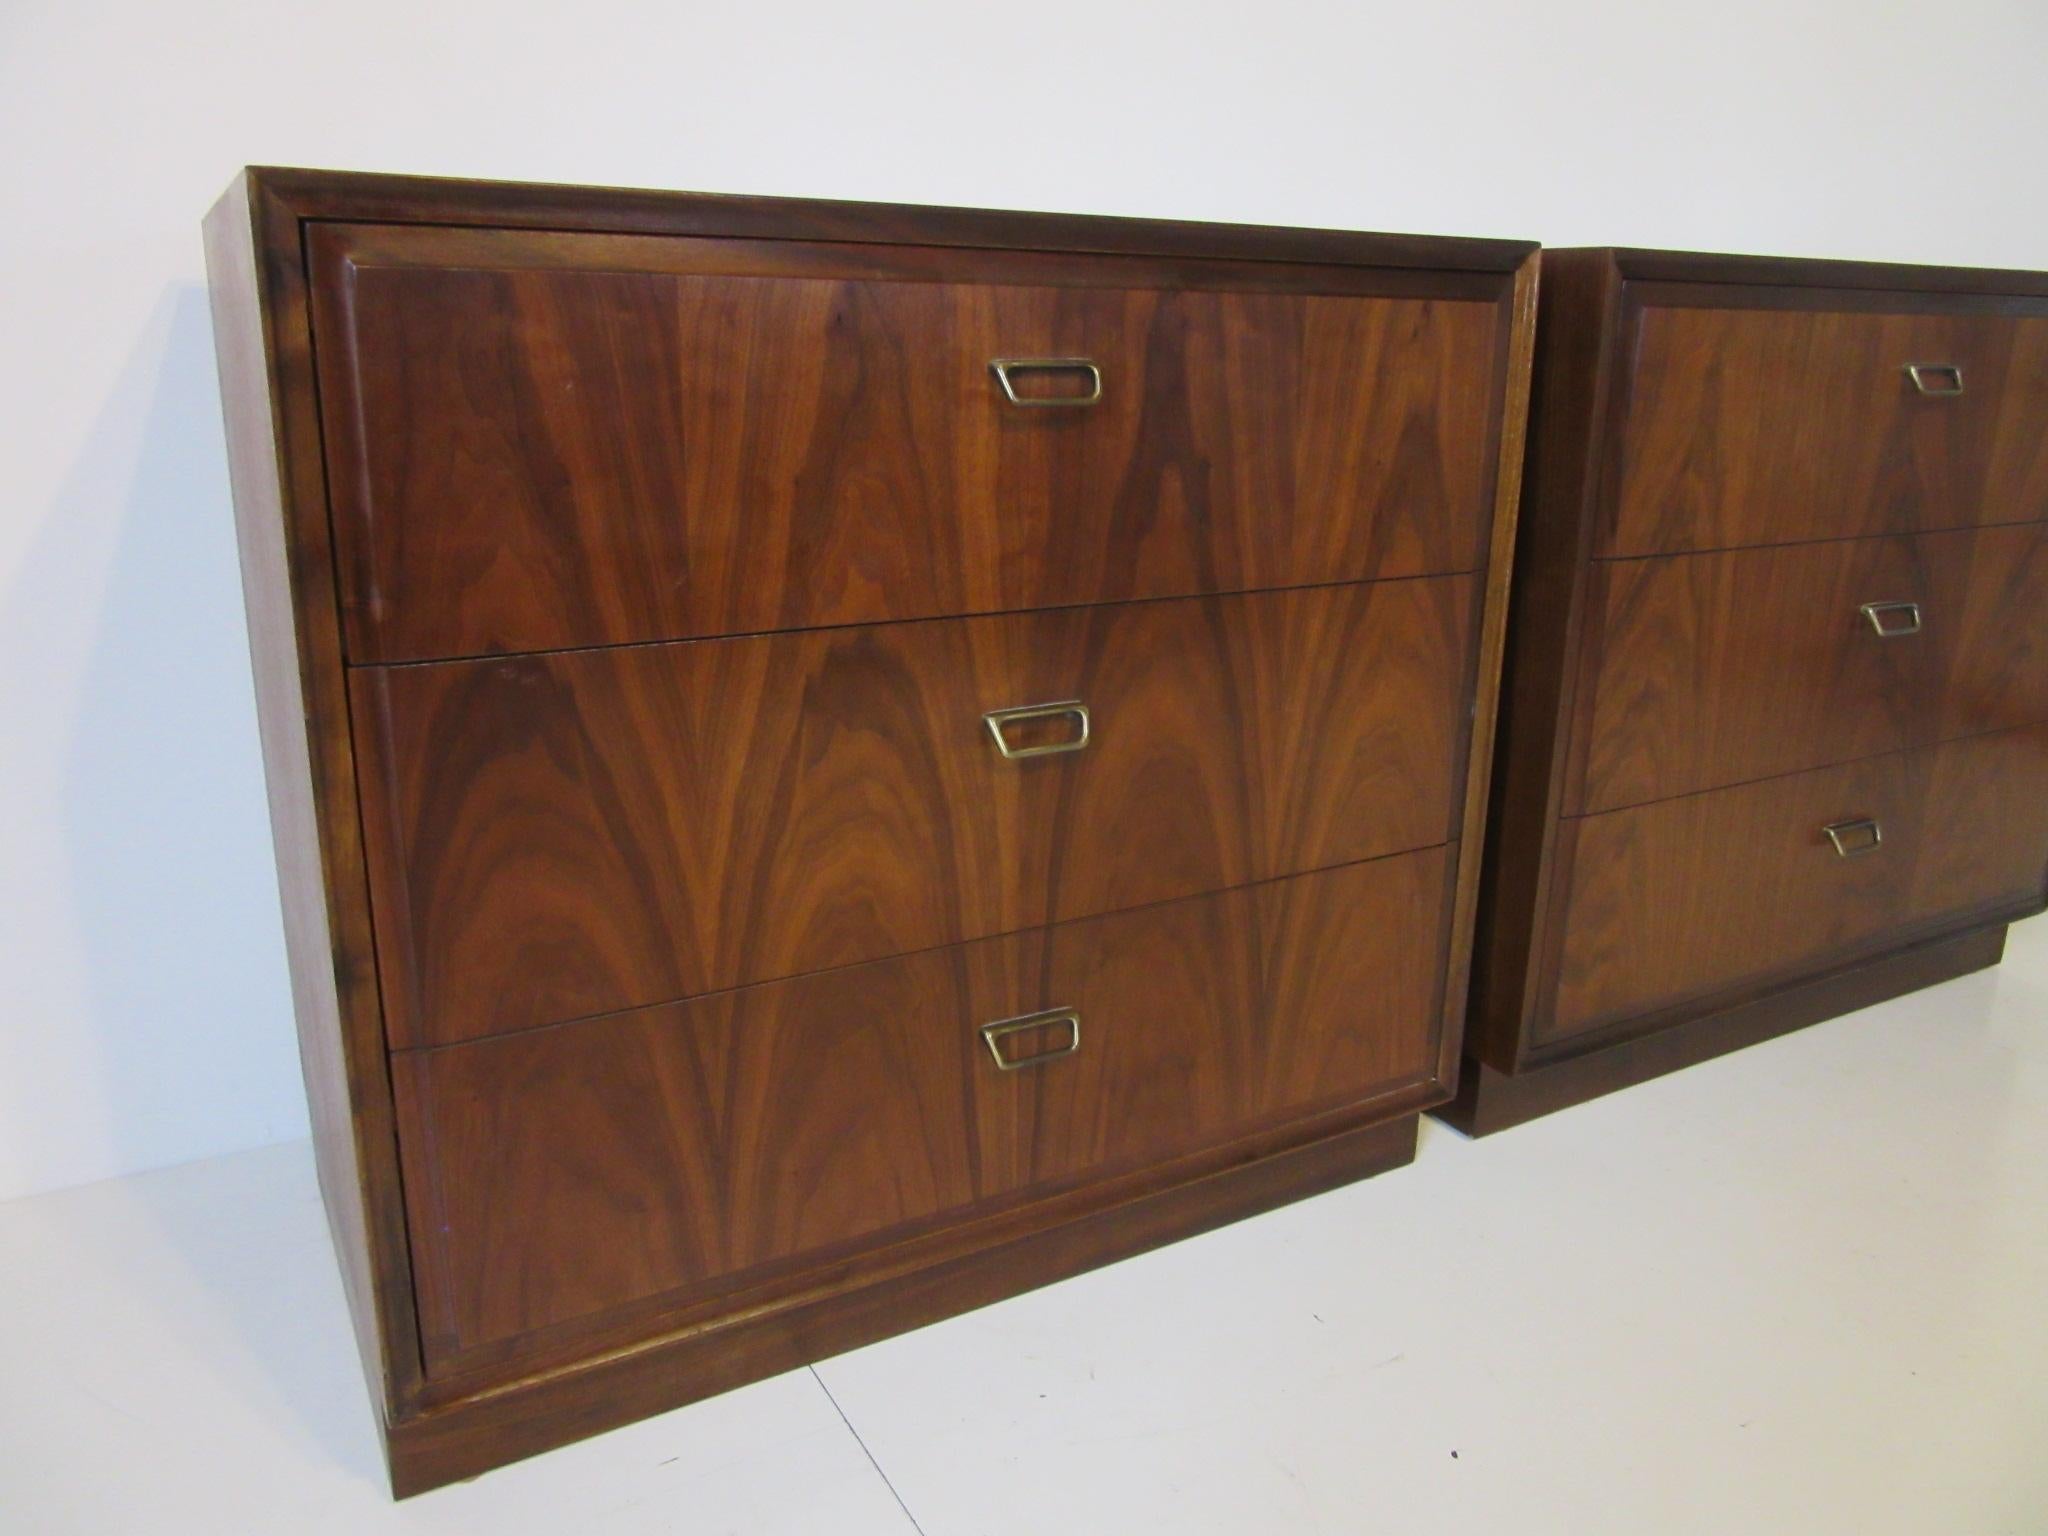 A pair of well grained small walnut three drawer chests with brass toned pulls, very well constructed manufactured by the Founders Furniture Company . With the scale of these chests they could be used as larger nightstands.